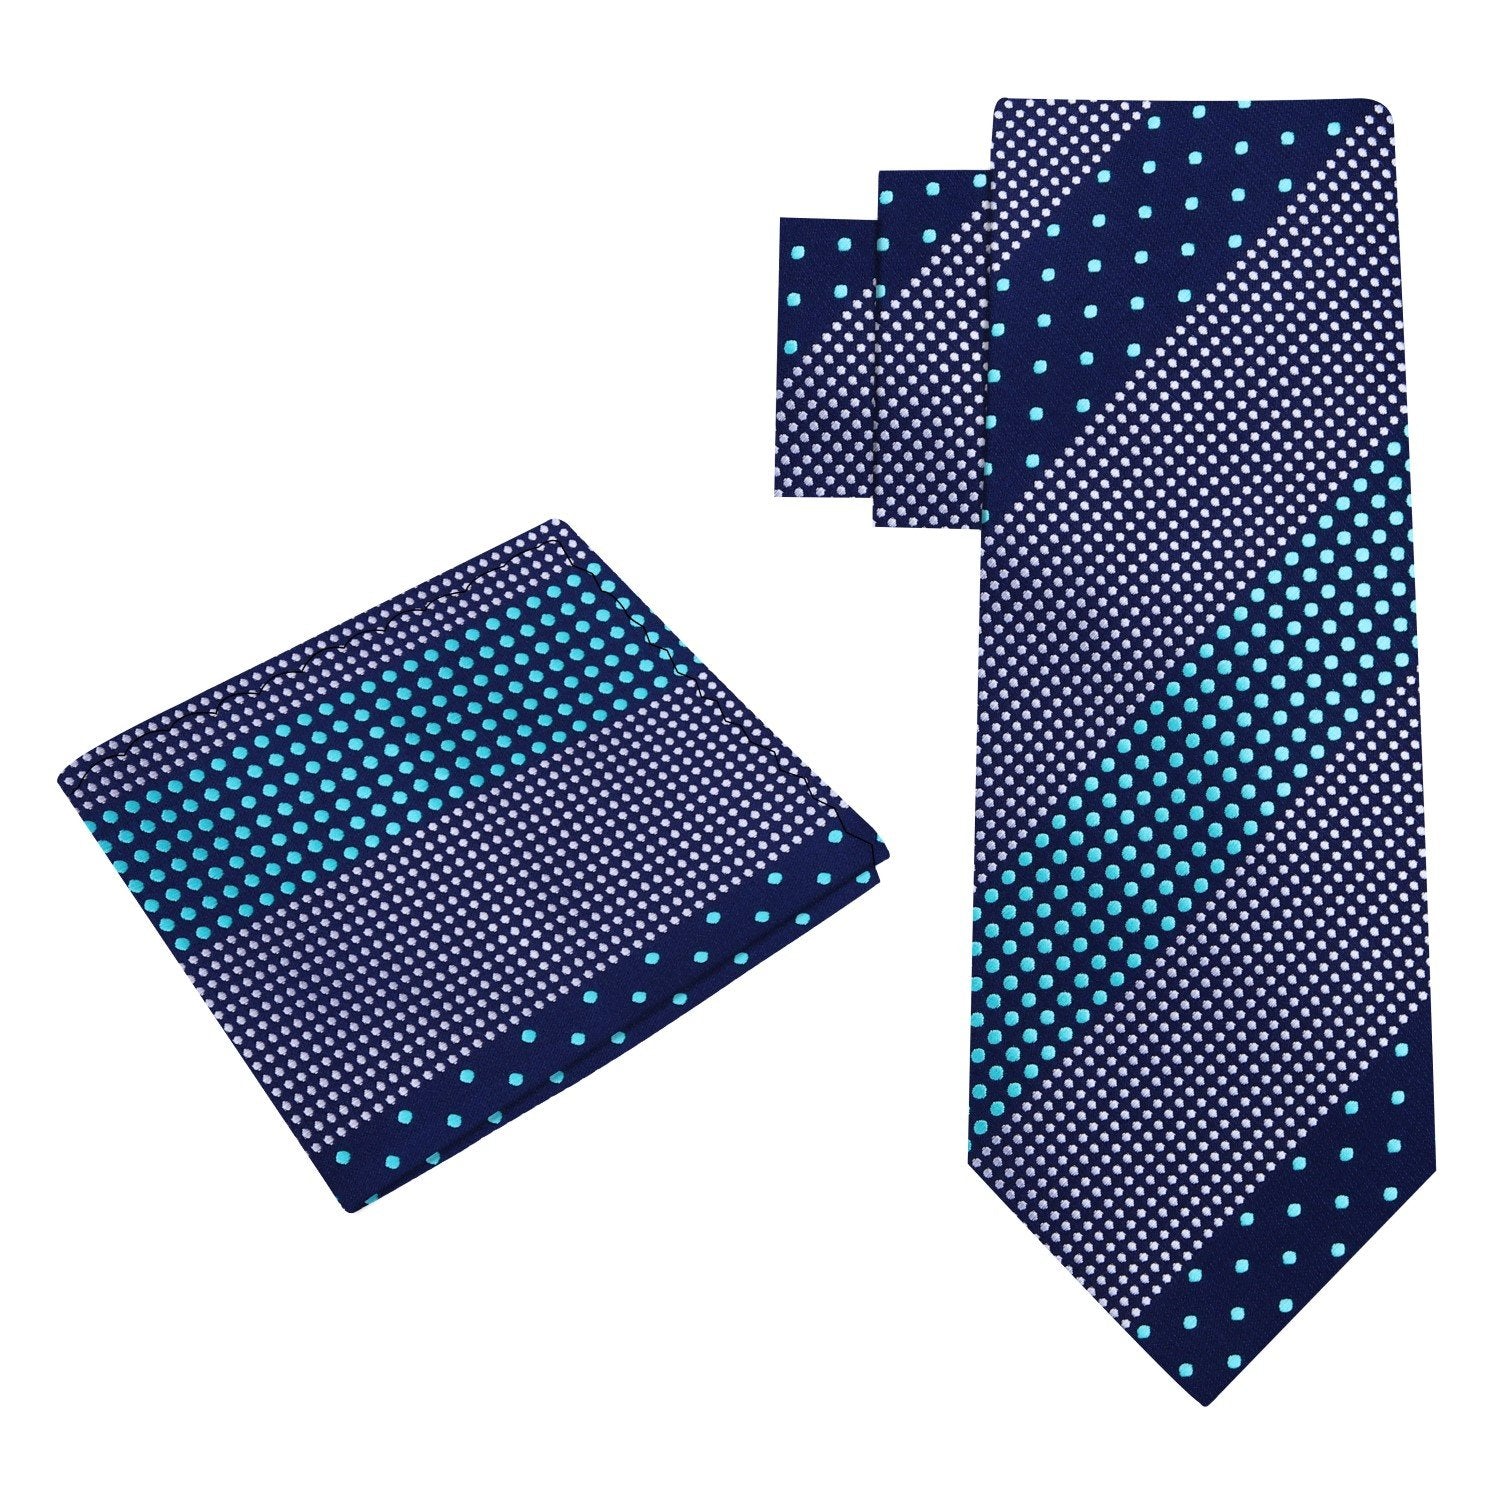 Alt View: Blue and White Dots Tie and Square